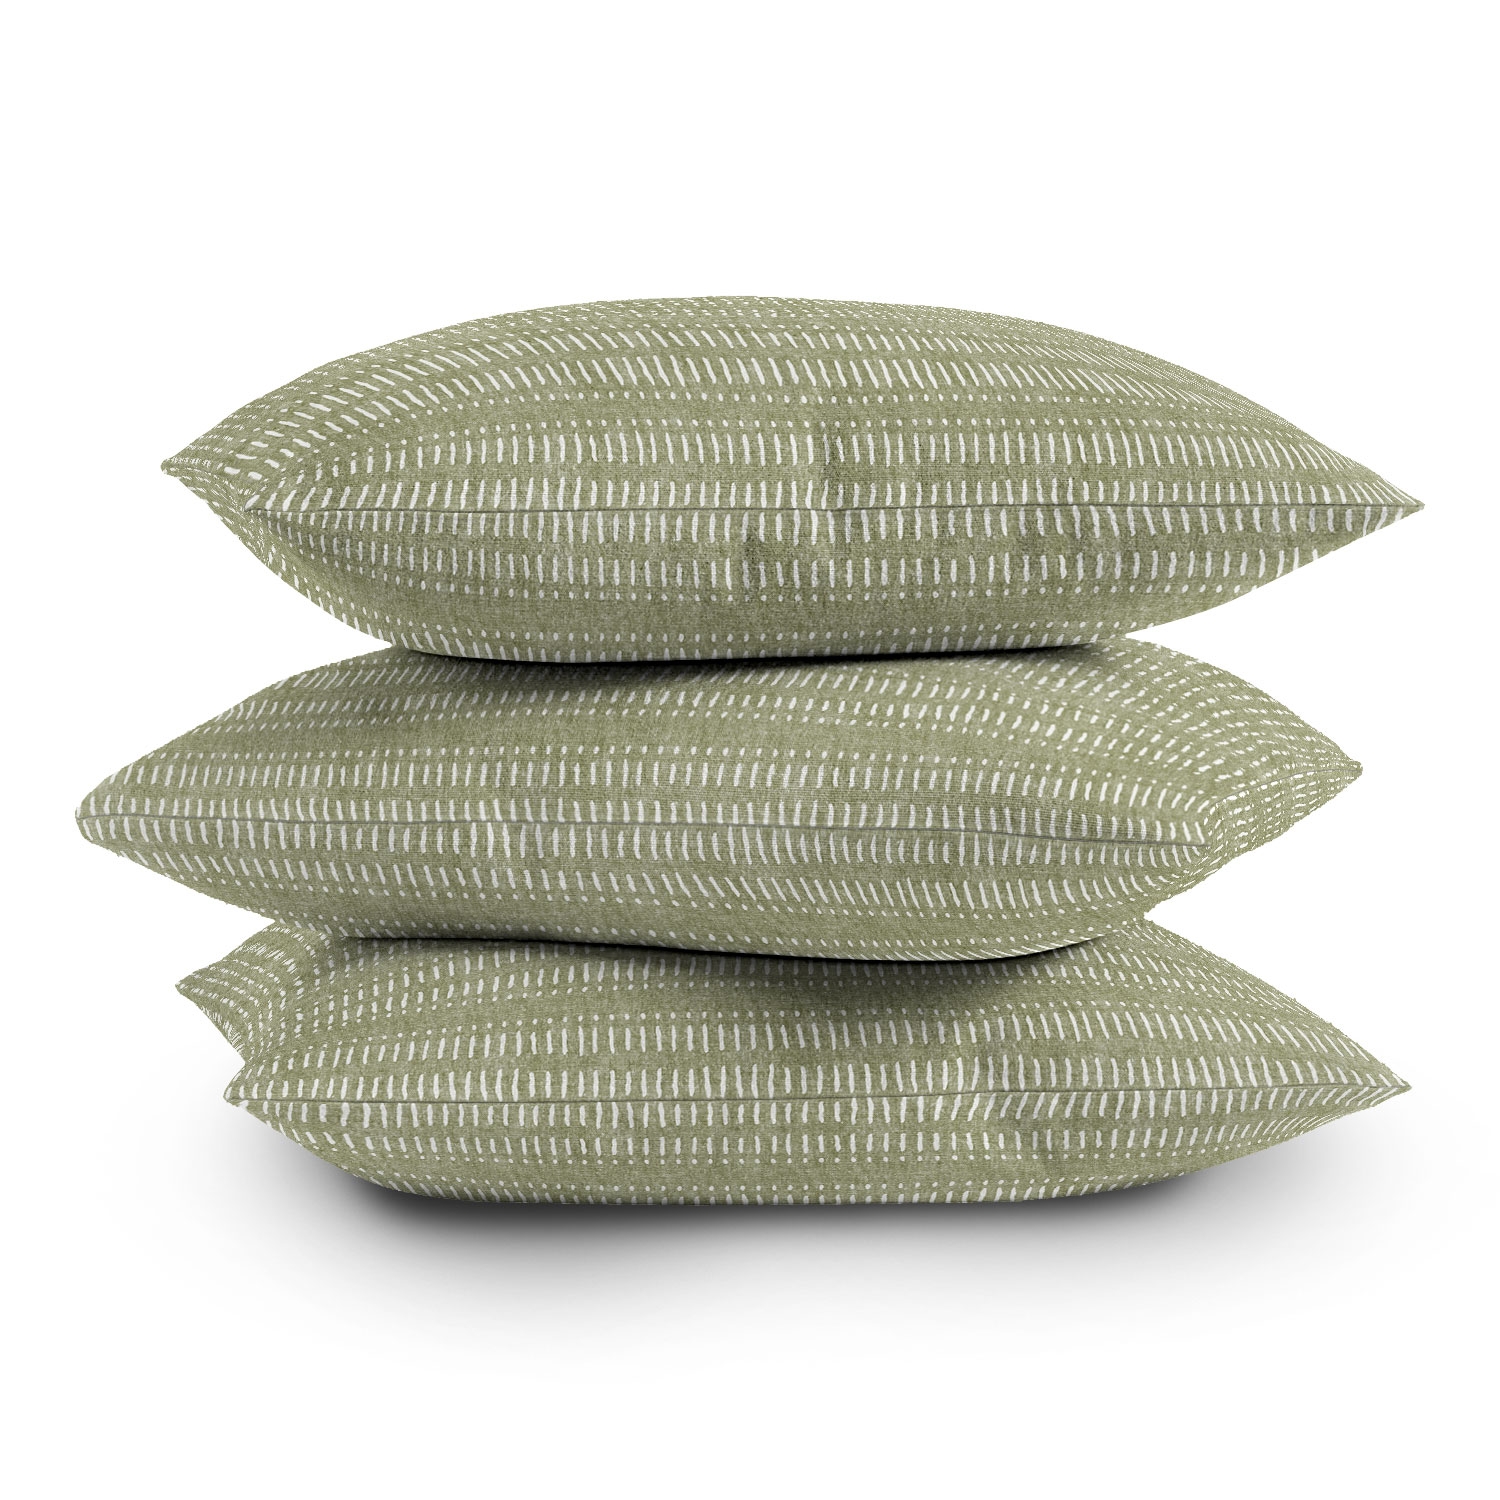 Dash Dot Stripes Olive by Little Arrow Design Co - Outdoor Throw Pillow 16" x 16" - Image 3